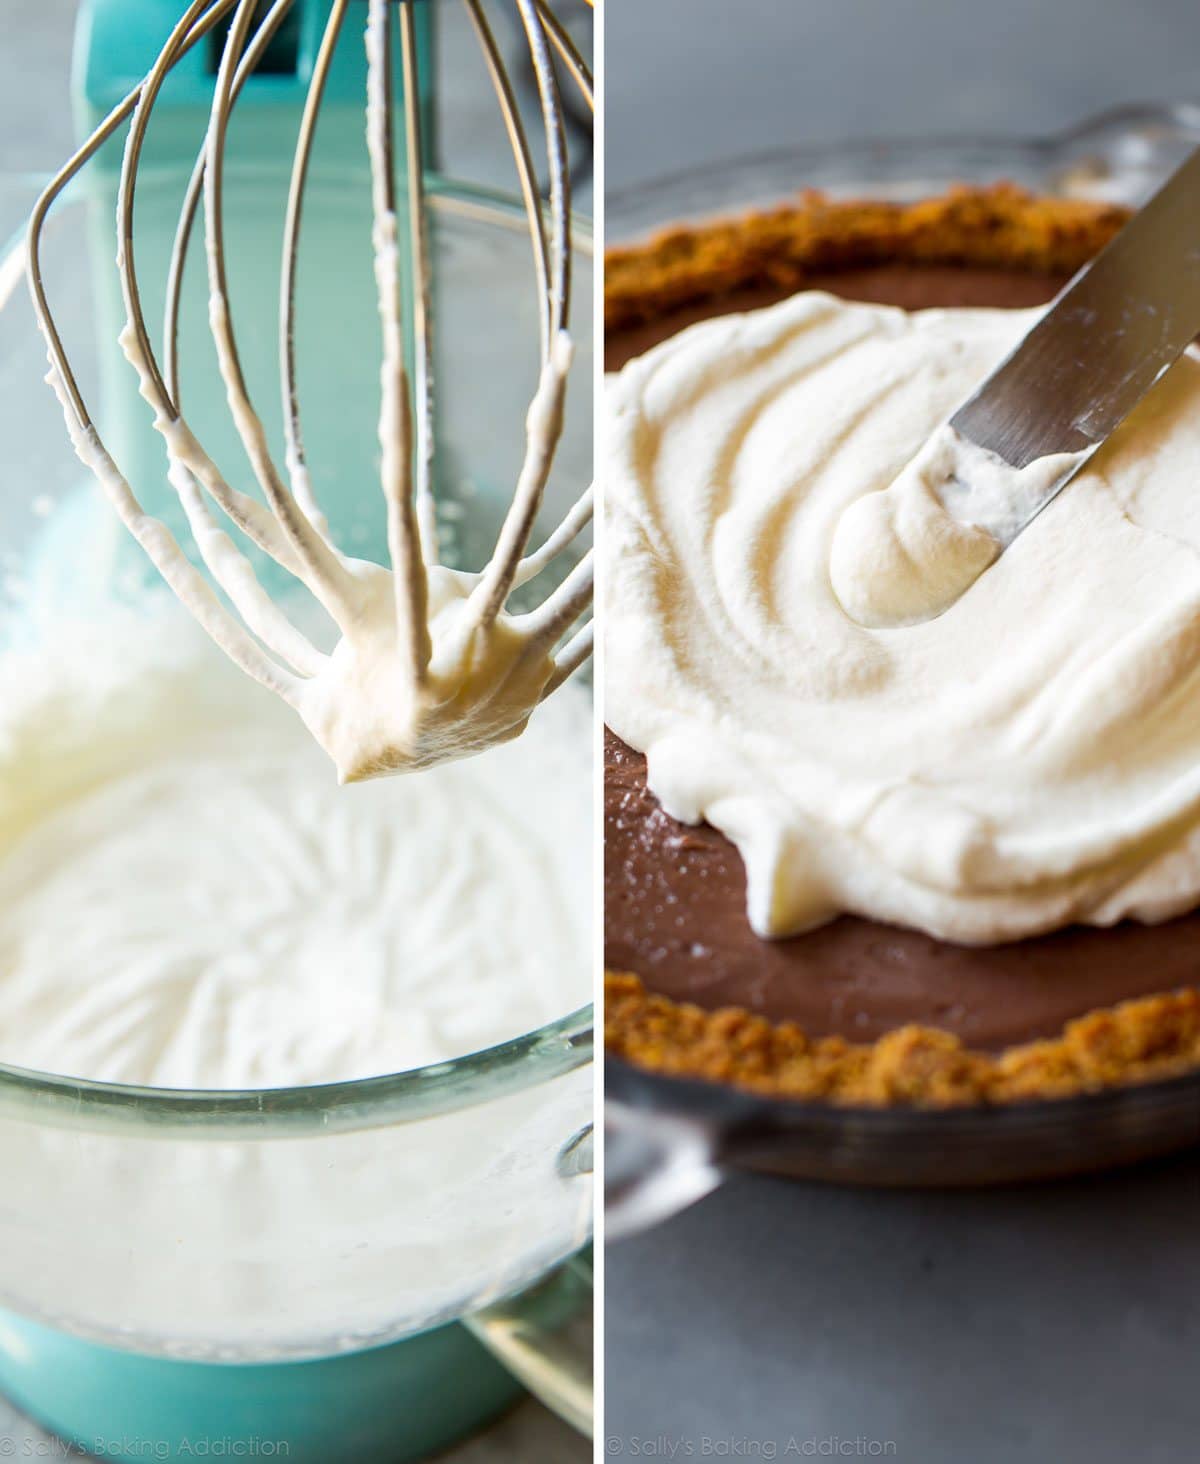 2 images of whipped cream in a stand mixer bowl with a whisk attachment and spreading whipped cream onto chocolate pudding pie